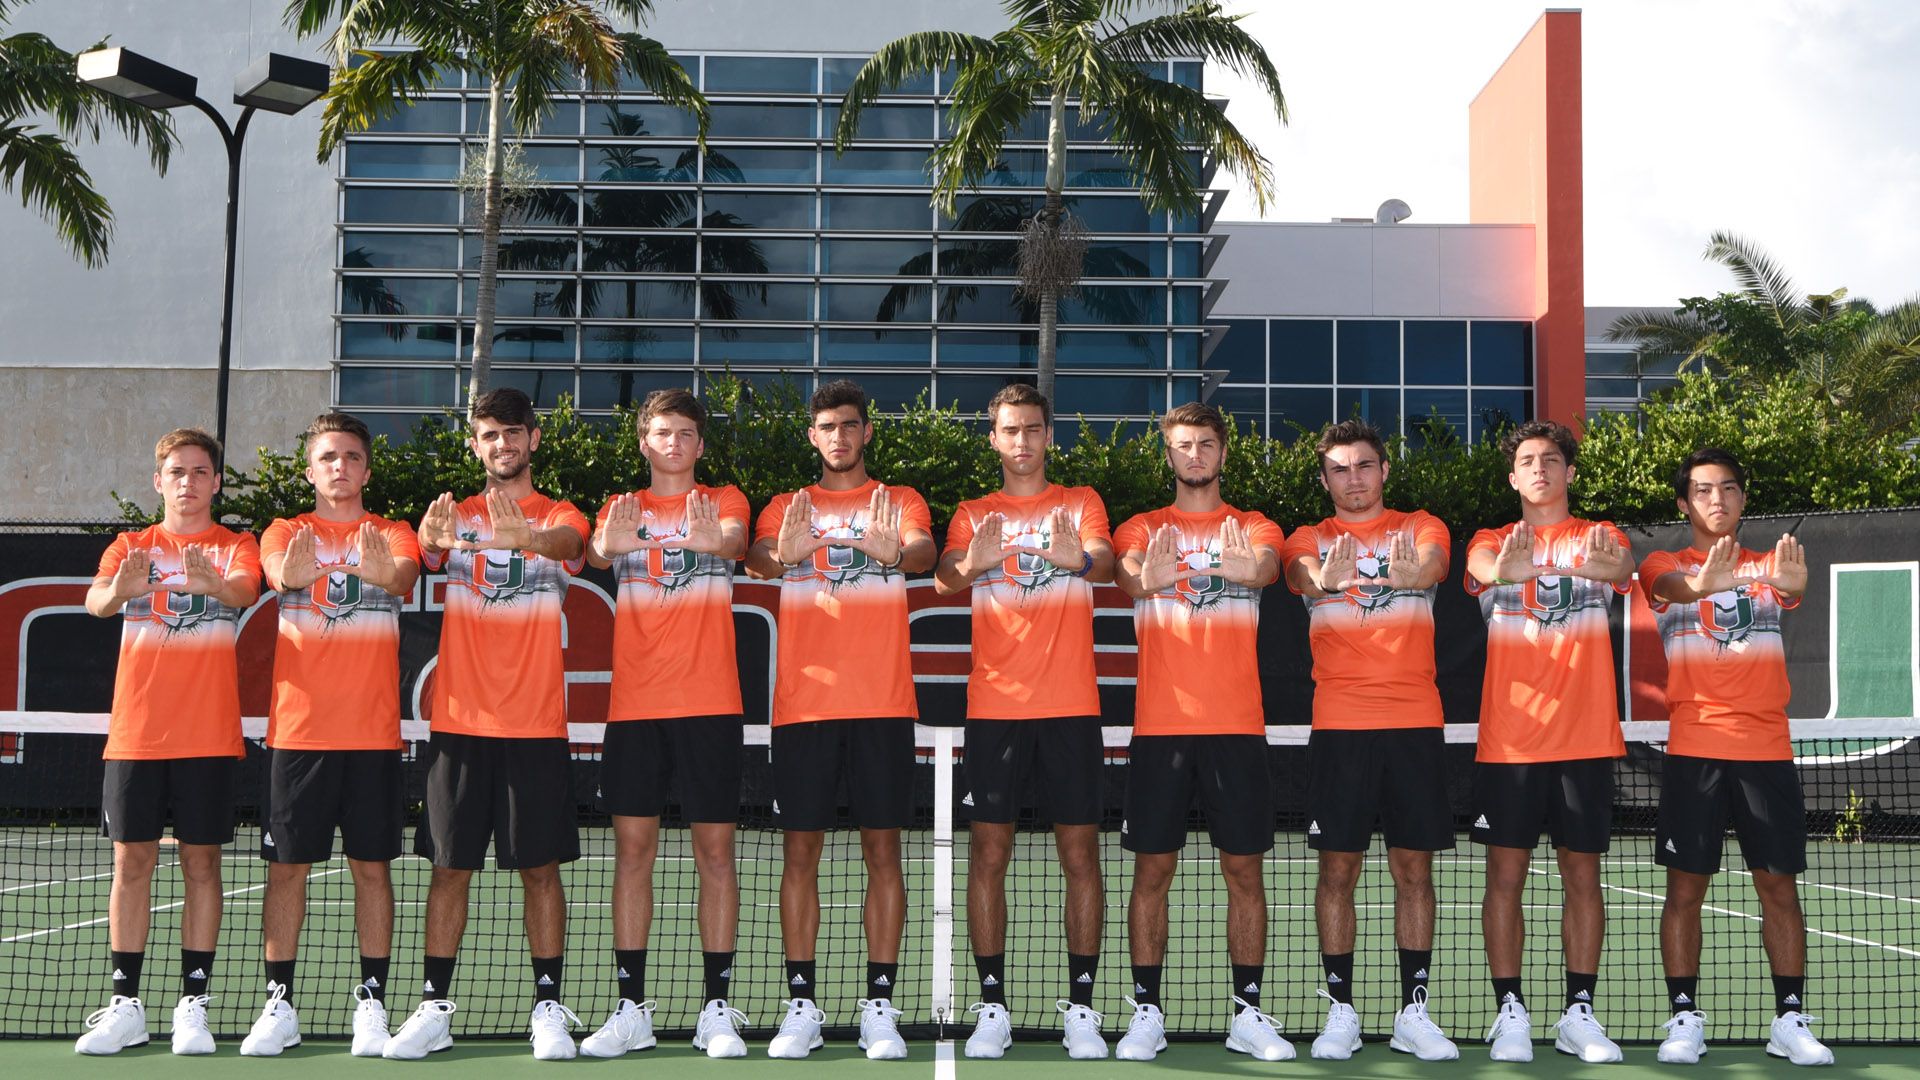 Six M. Tennis Home Matches to be aired on ACC Network Extra